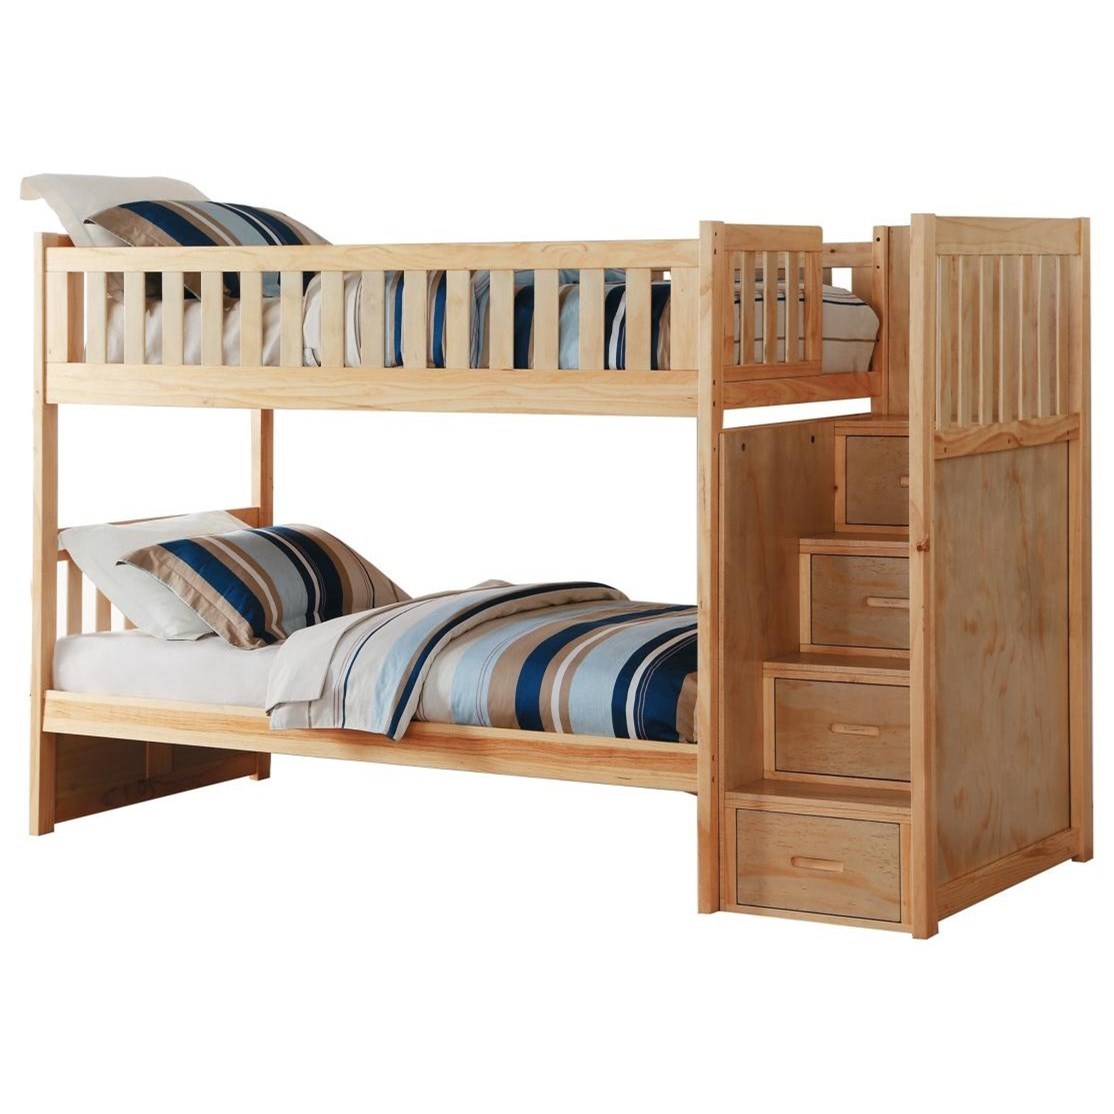 bunk bed 3 in 1